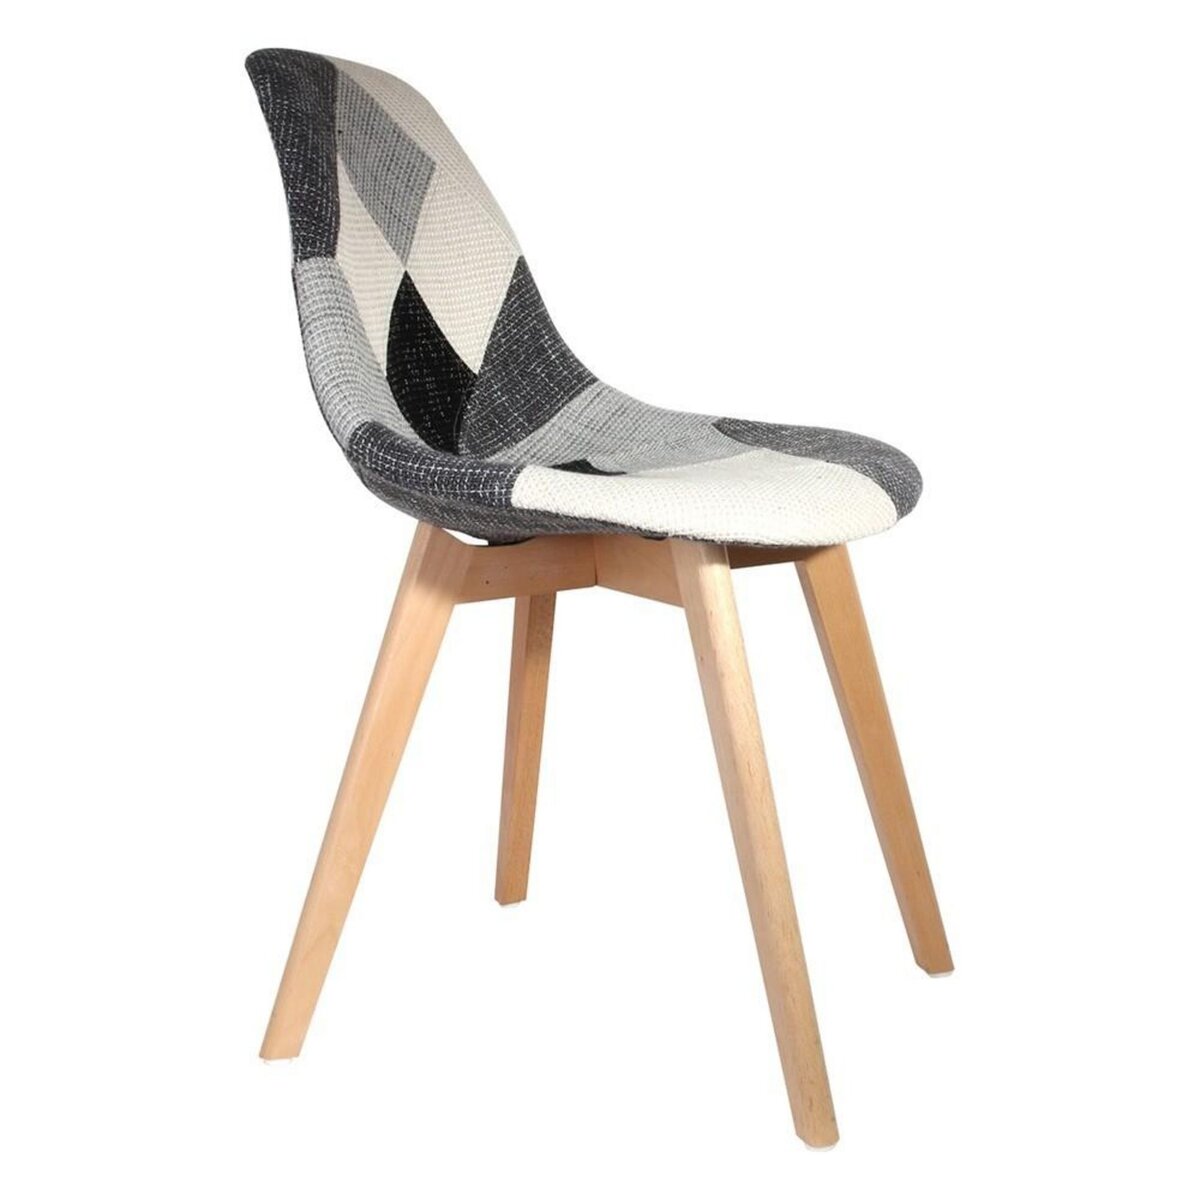 Chaise scandinave patchwork pas cher - Mobilier chaise patchwork scandinave